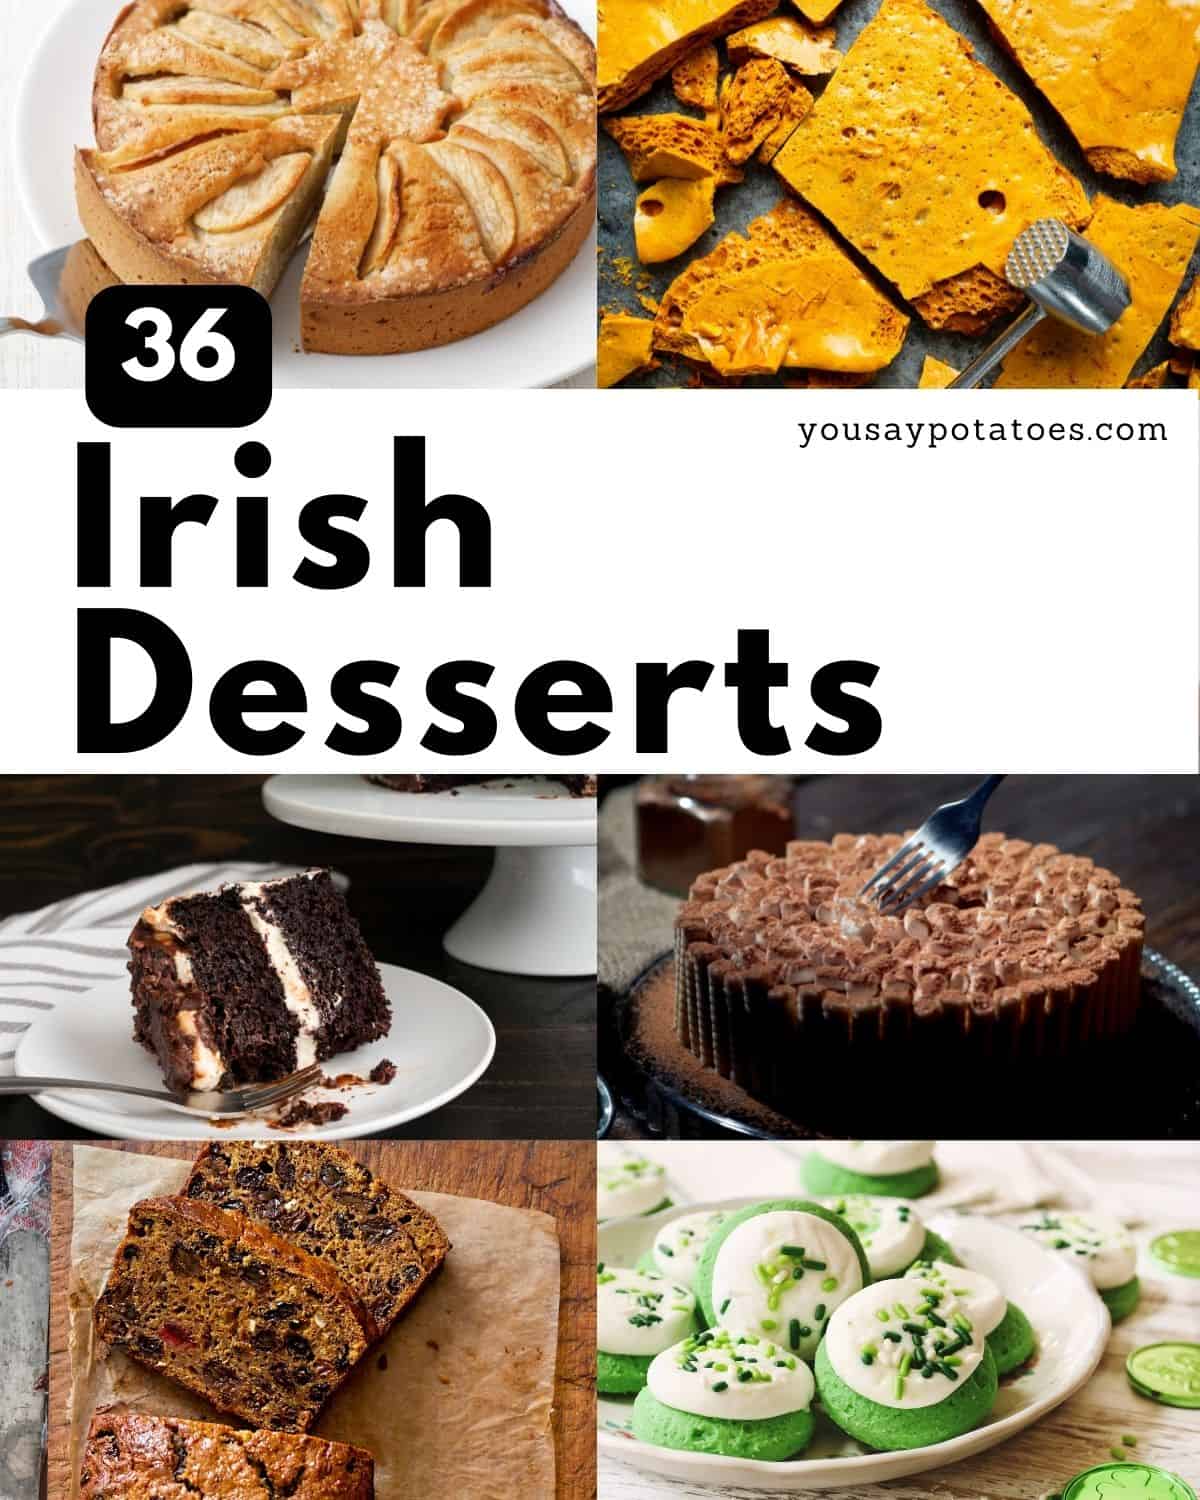 Collage of recipes, with text: 36 Irish Desserts.